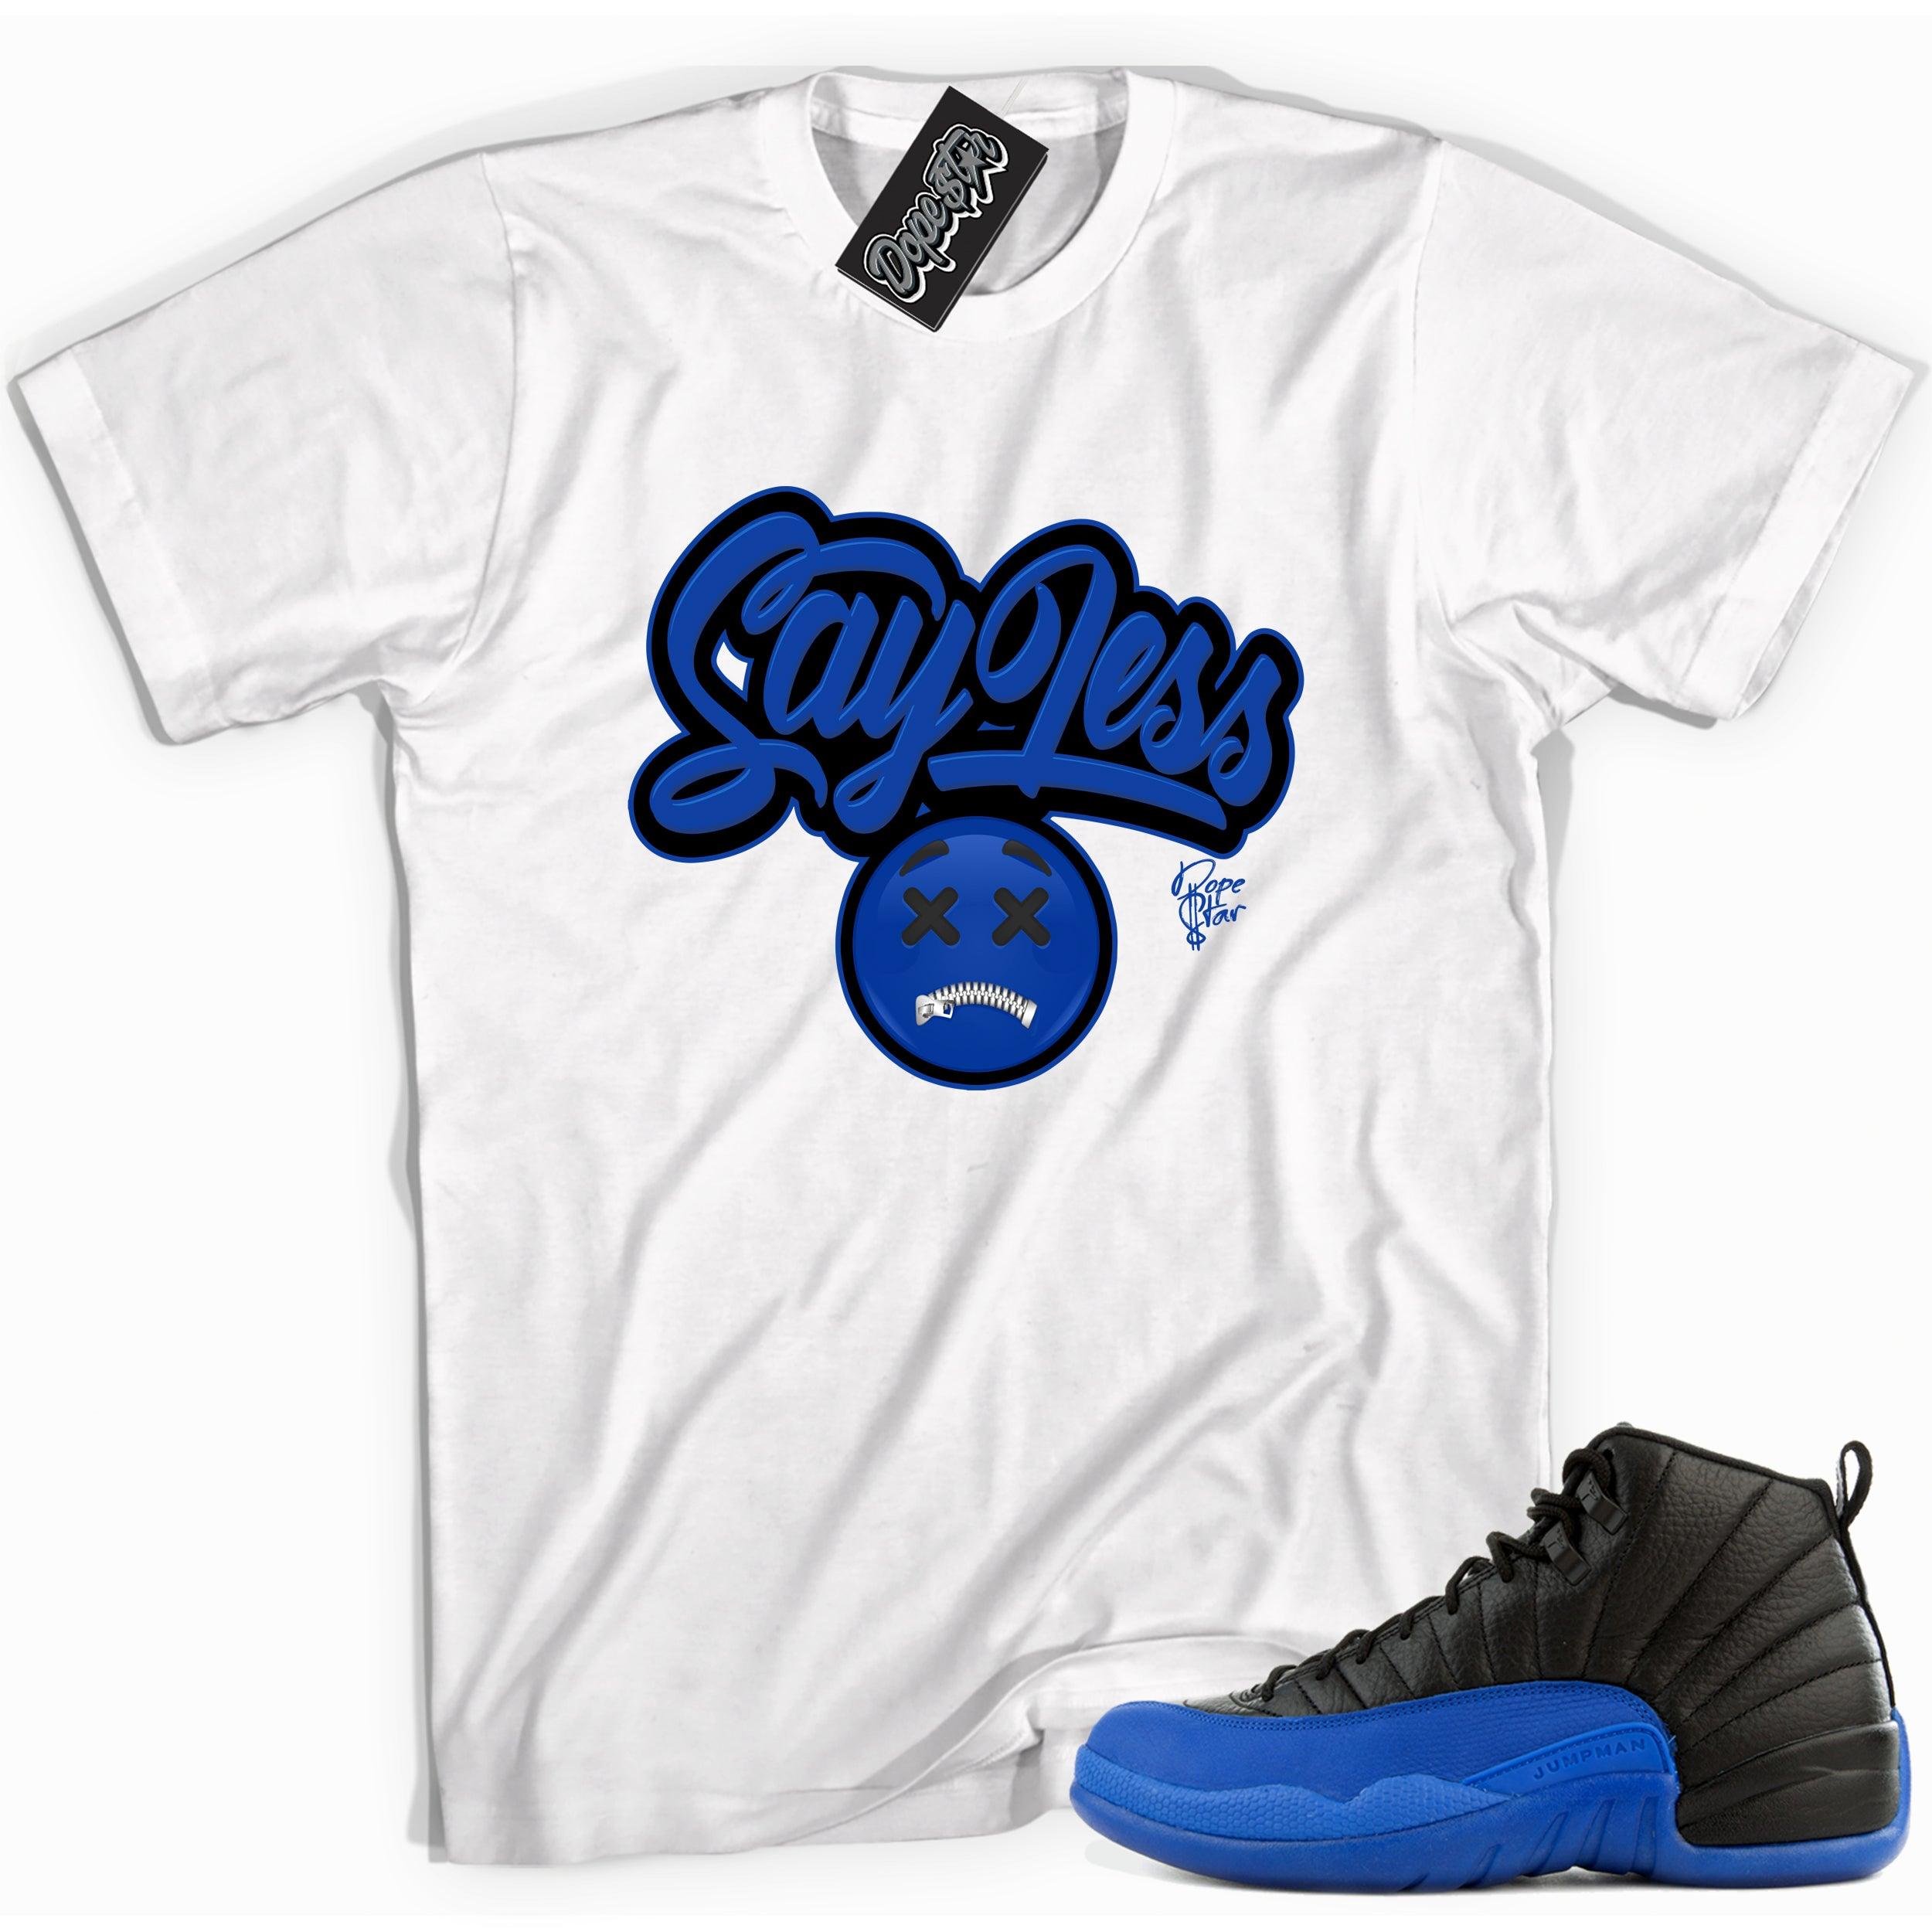 Cool white graphic tee with 'say less' print, that perfectly matches Air Jordan 12 Retro Black Game Royal sneakers.